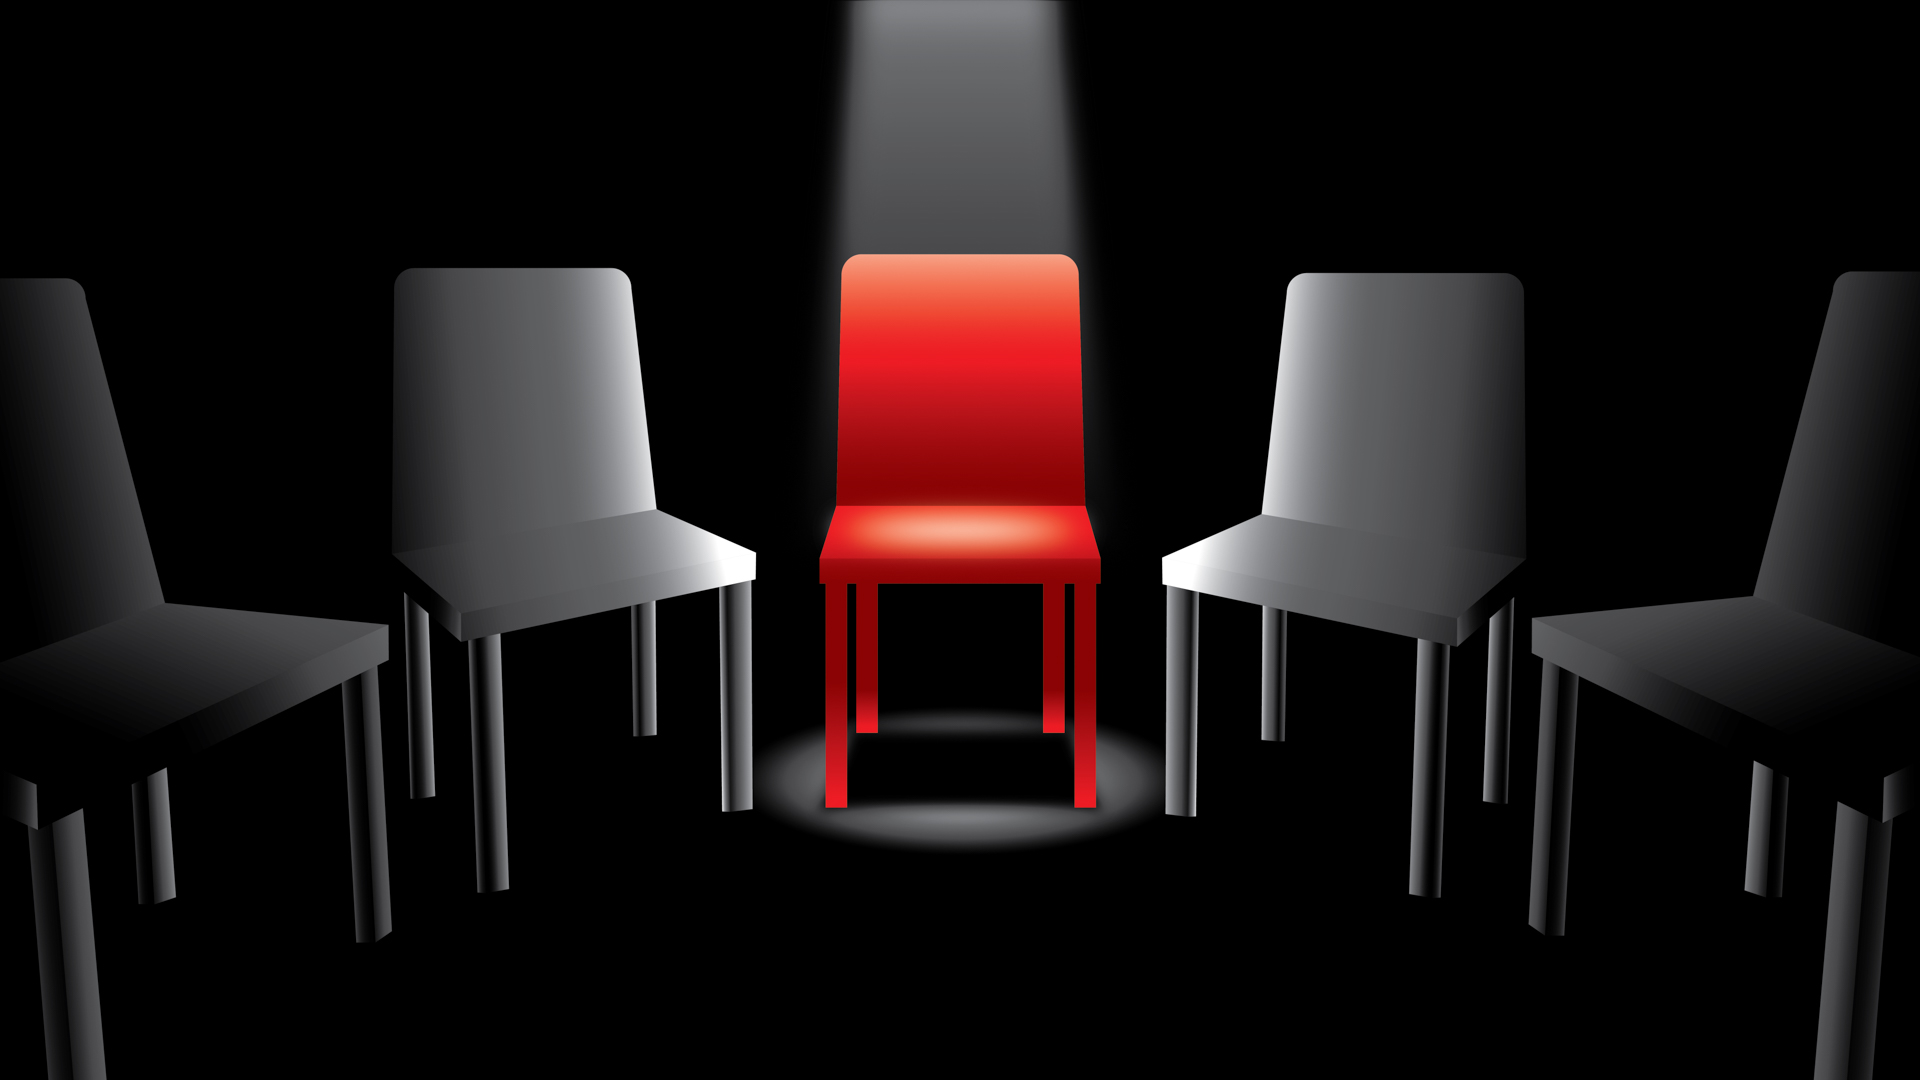 Illustration of chairs in a circle with a light beaming down on a red on in the center of the image